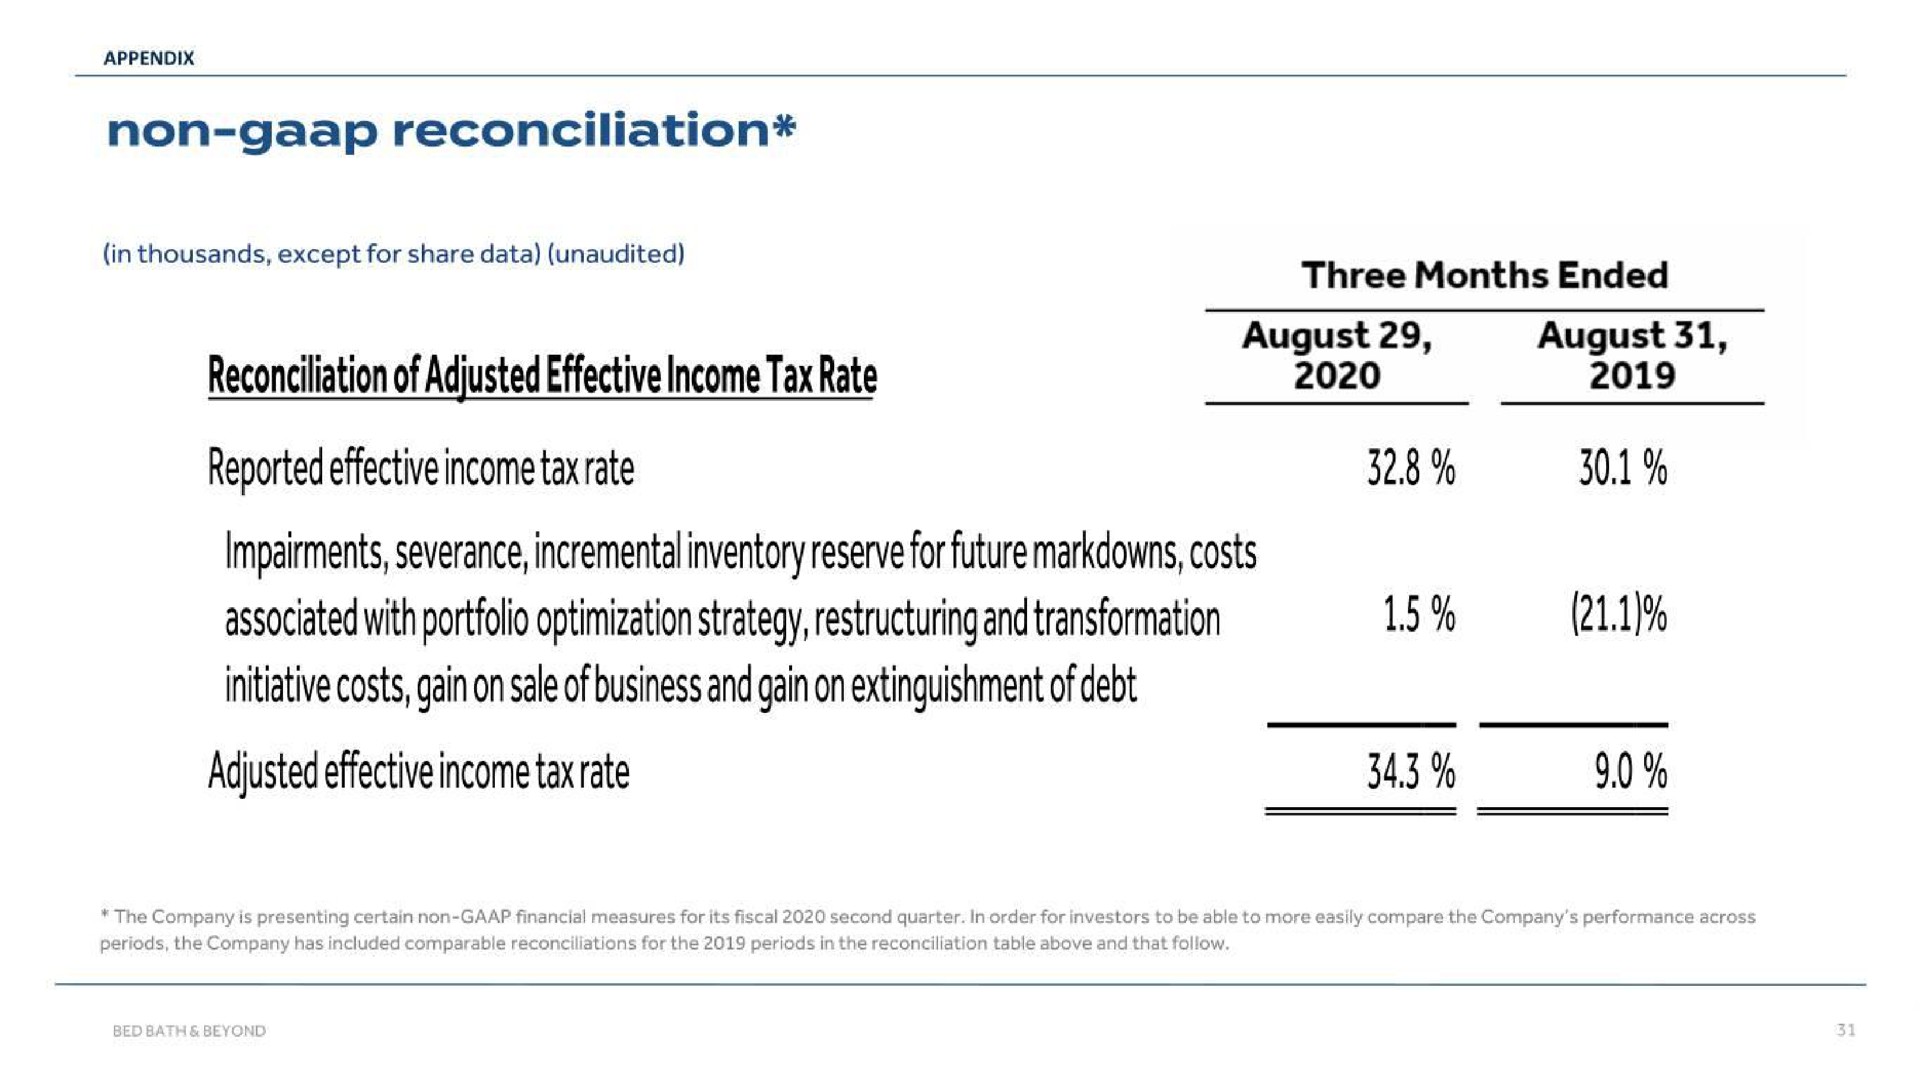 non reconciliation reconciliation of adjusted effective income tax rate reported effective income tax rate impairments severance incremental inventory reserve for future costs associated with portfolio optimization strategy and transformation initiative costs gain on sale of business and gain on extinguishment of debt adjusted effective income tax rate august august | Bed Bath & Beyond